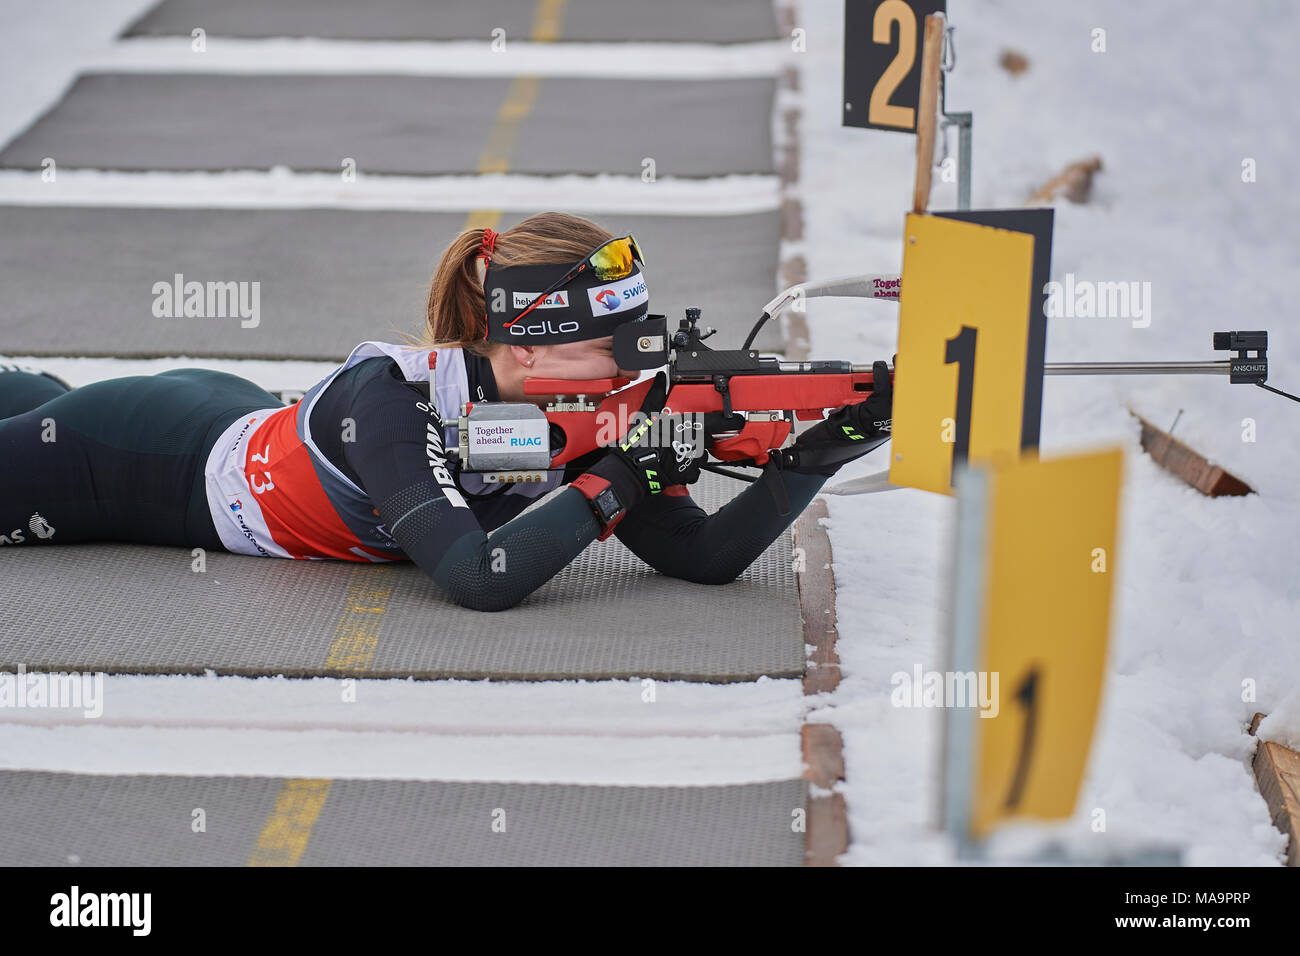 Lenzerheide, Switzerland, 31st March 2018. Elisa Perini during the Women's Sprint Competition at the Swiss National Biathlon Championships Stock Photo